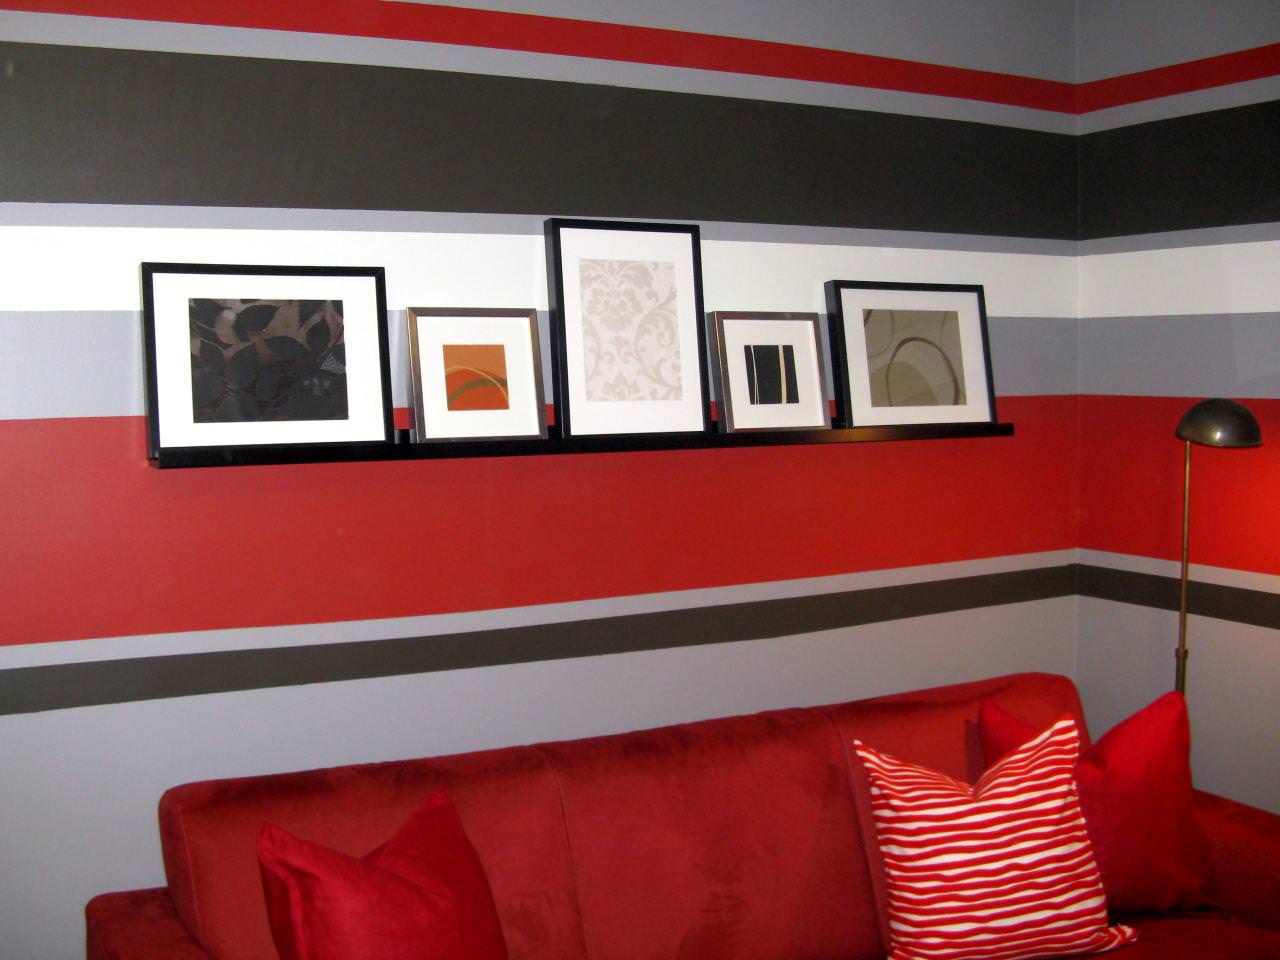 How To Paint Horizontal Stripes On A Wall Without Bleeding